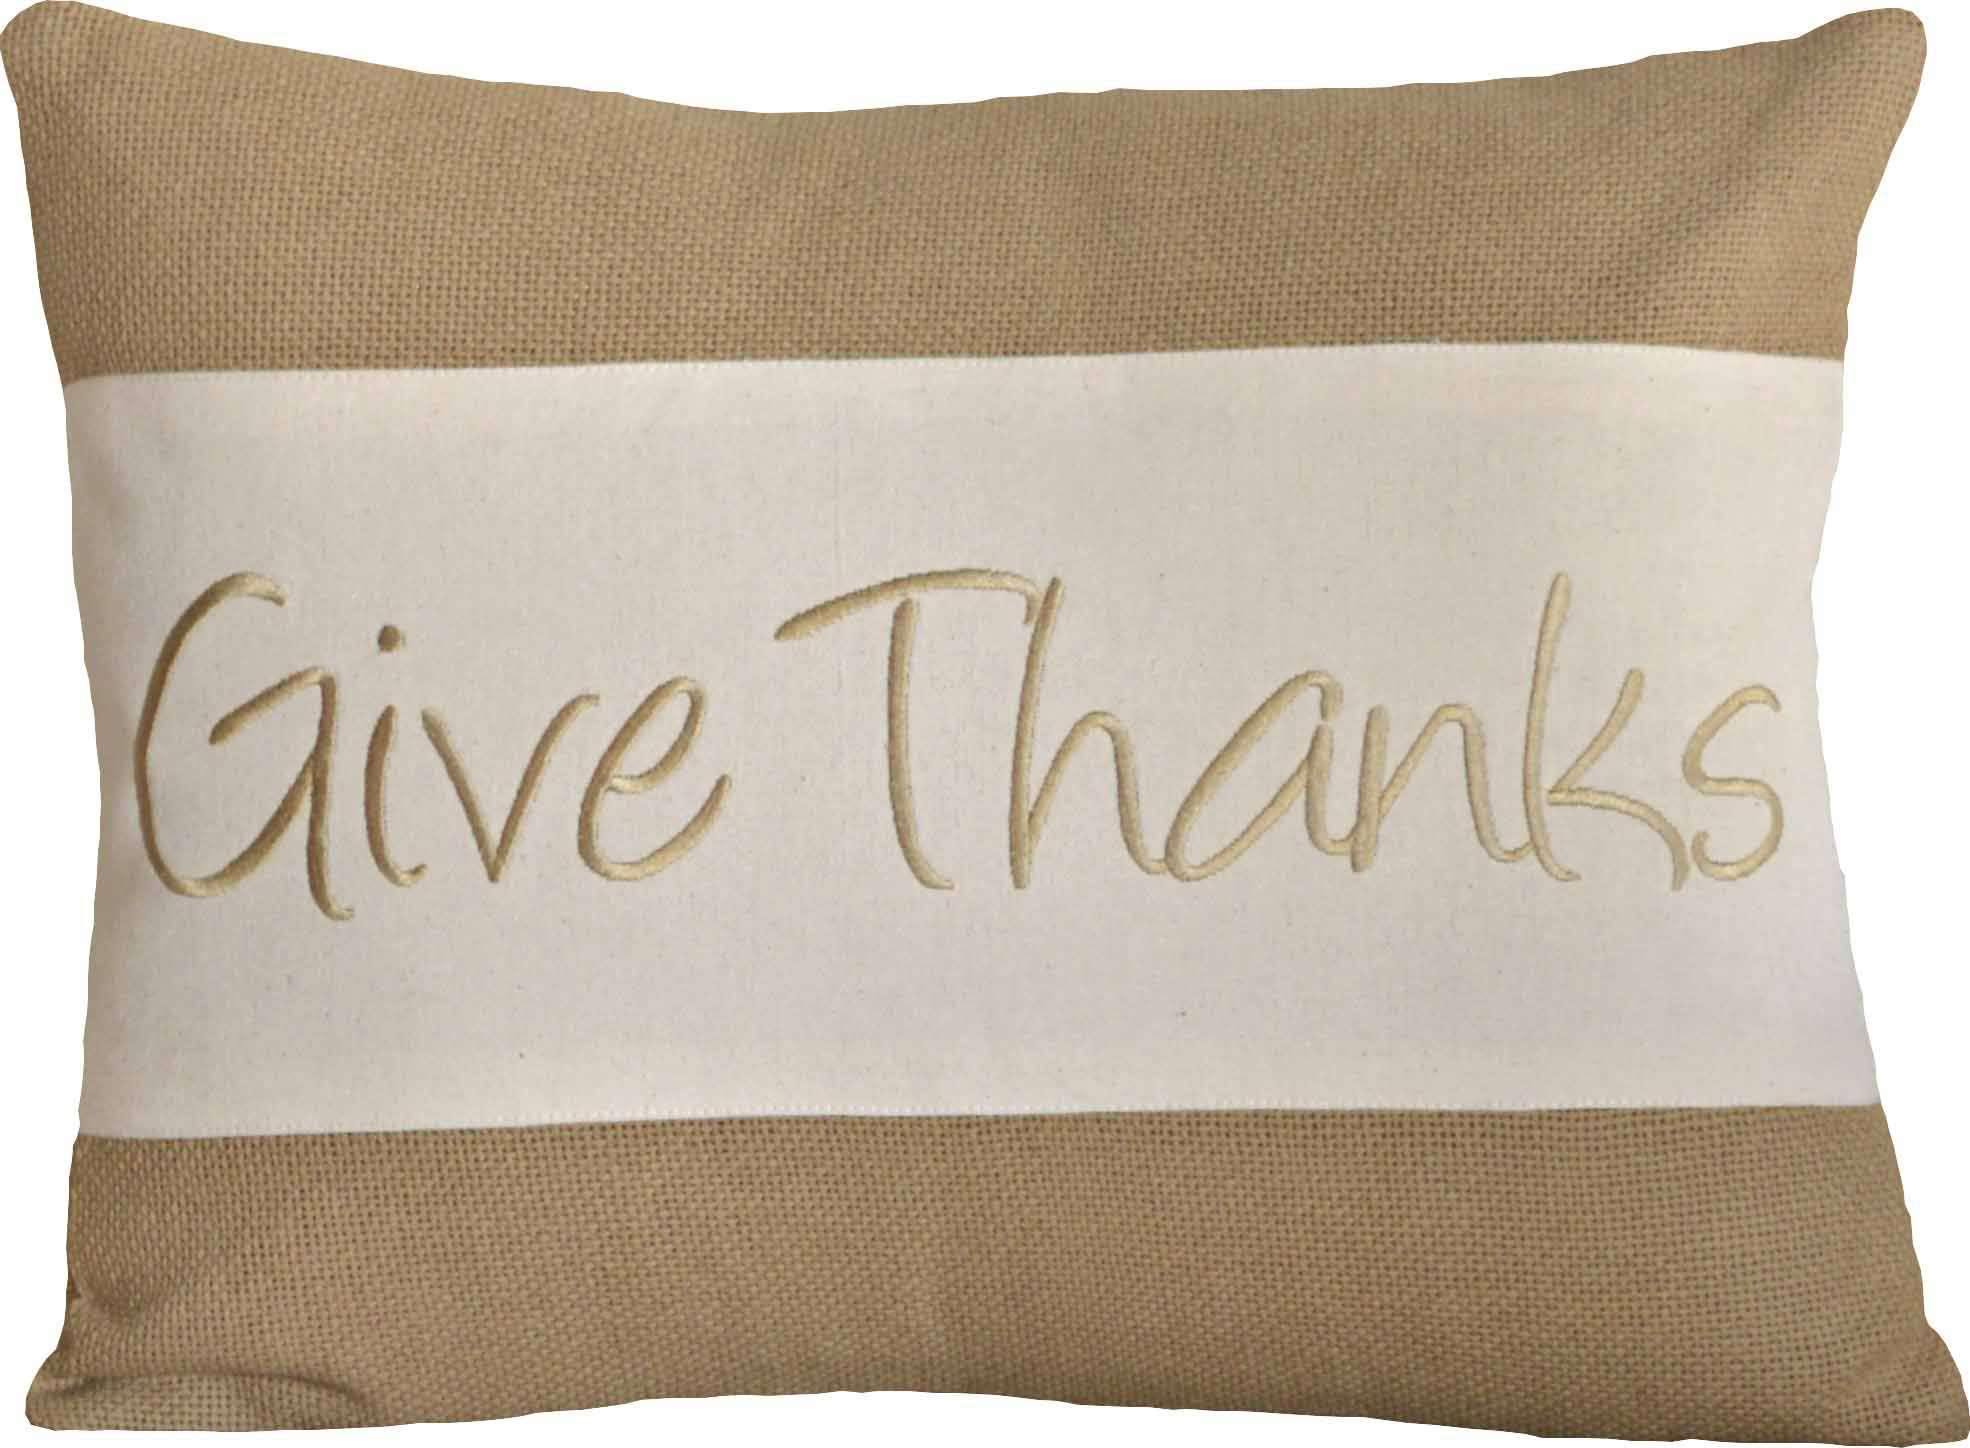 Give Thanks Pillow 14x18 - The Fox Decor